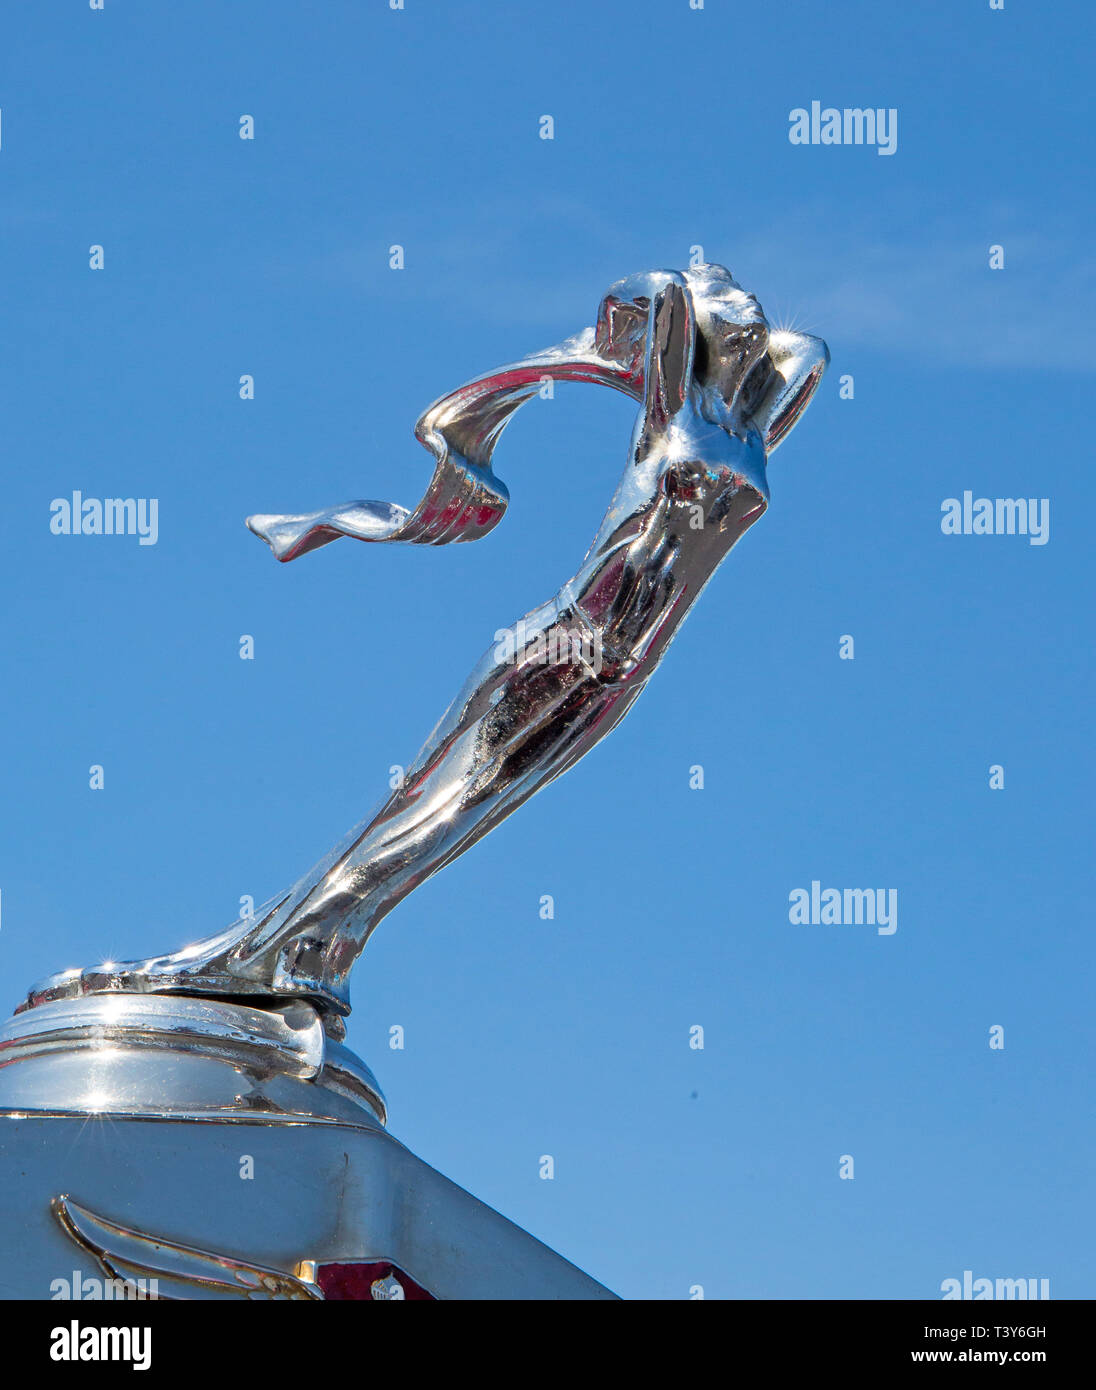 CONCORD, NC (USA) - April 6, 2019:  Closeup of a 1928 LaSalle automobile hood ornament on display at the Pennzoil AutoFair Classic Car Show at Charlot Stock Photo